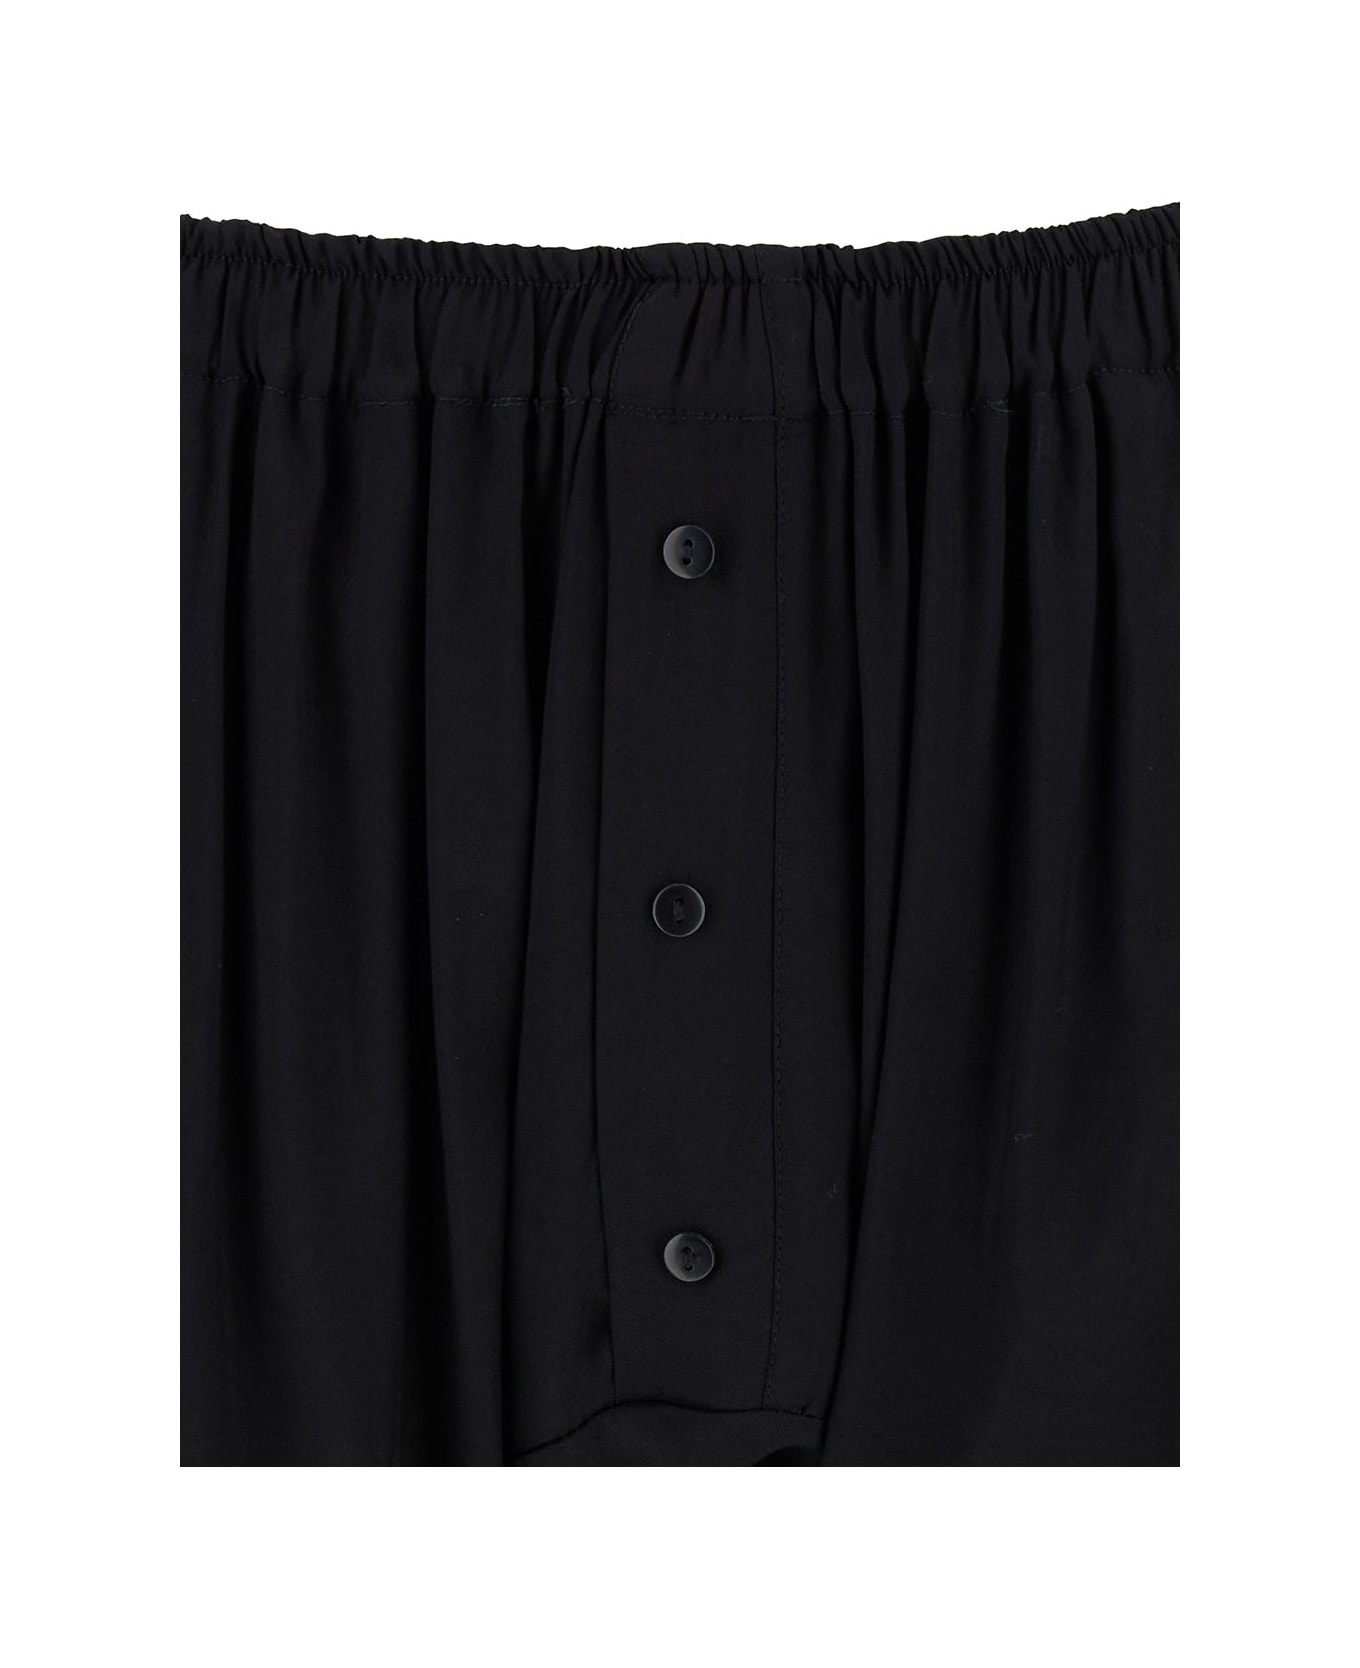 Federica Tosi Black Bermuda Shorts With Buttons In Viscose Woman - Black ショートパンツ